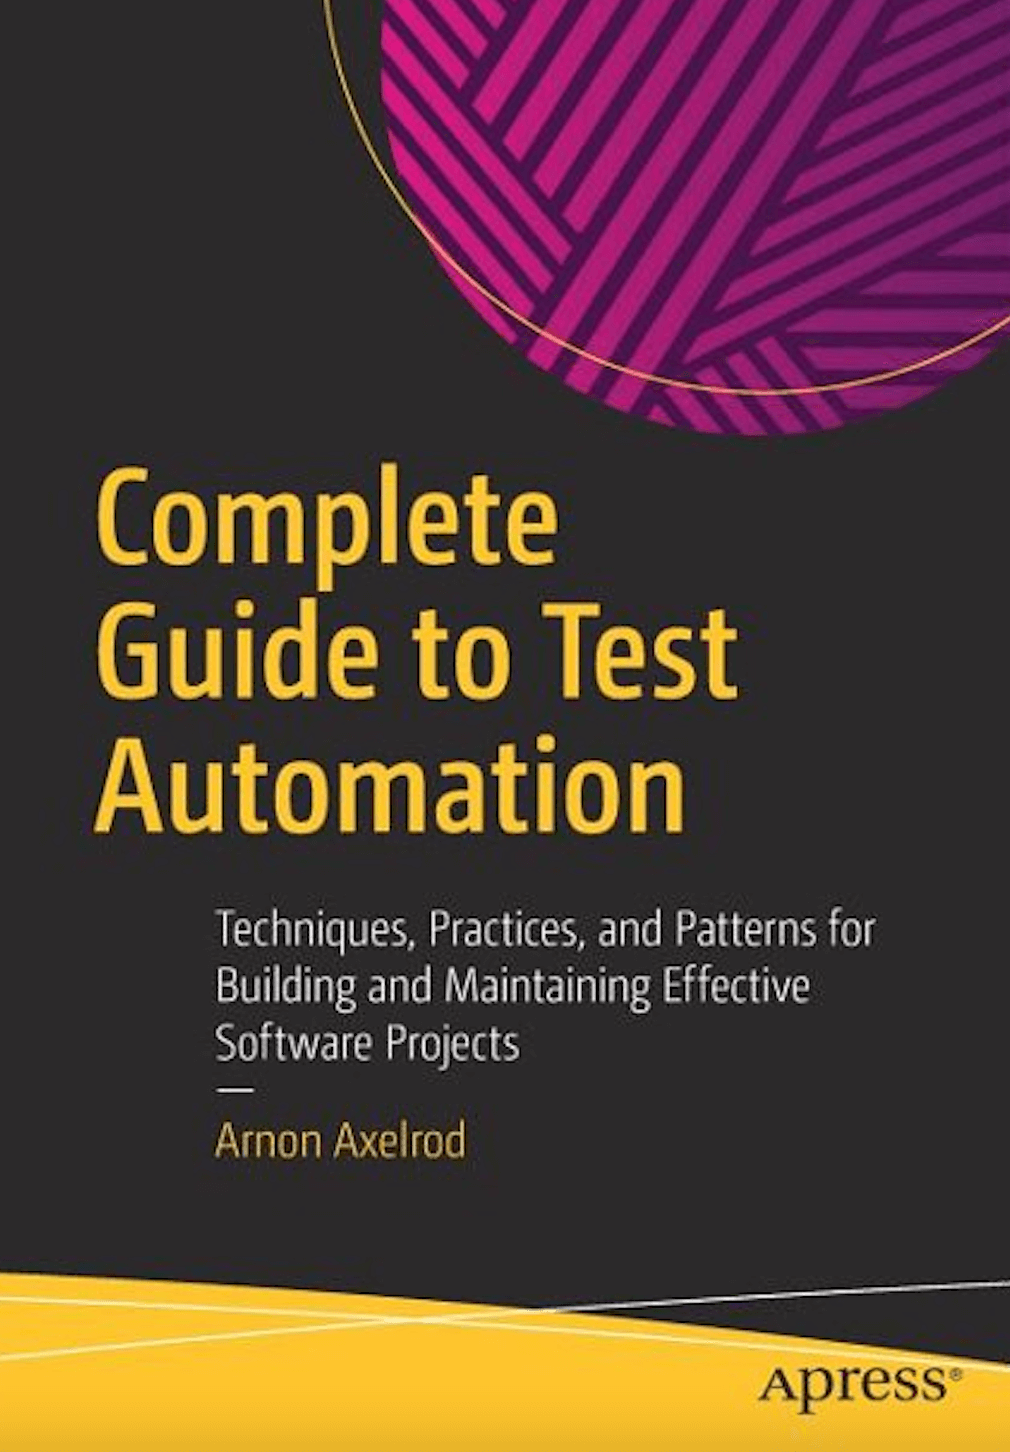 Complete Guide to Test Automation: Techniques, Practices, and Patterns for Building and Maintaining Effective Software Projects cover